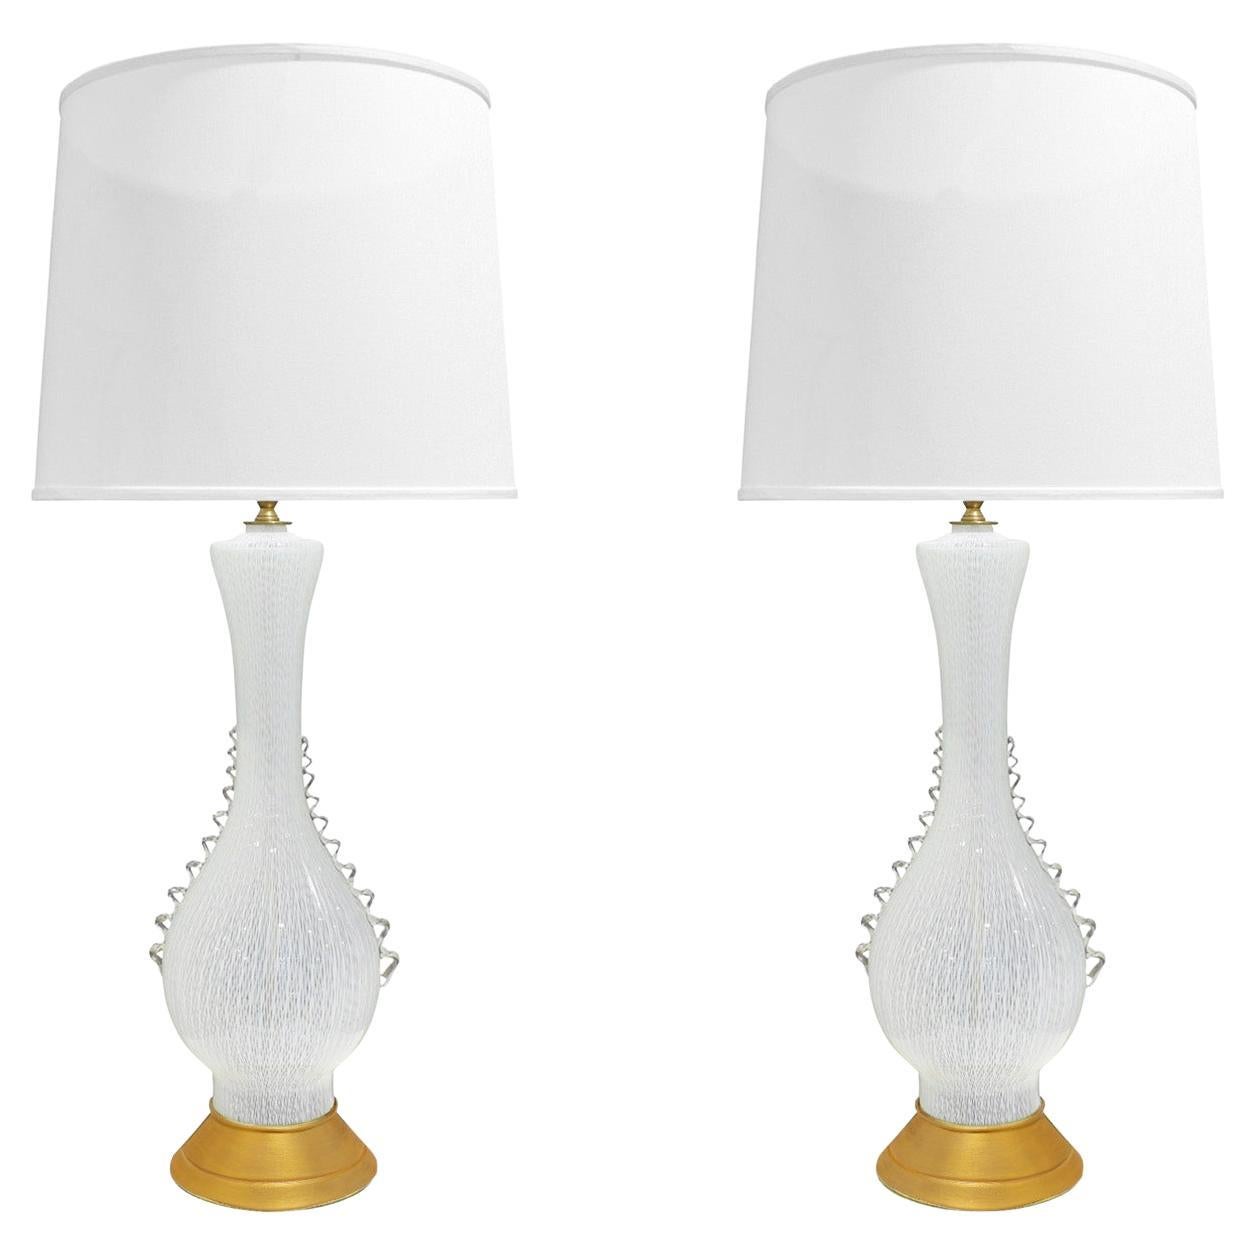 Aureliano Toso Pair of Exquisite Hand Blown Table Lamps, 1950s